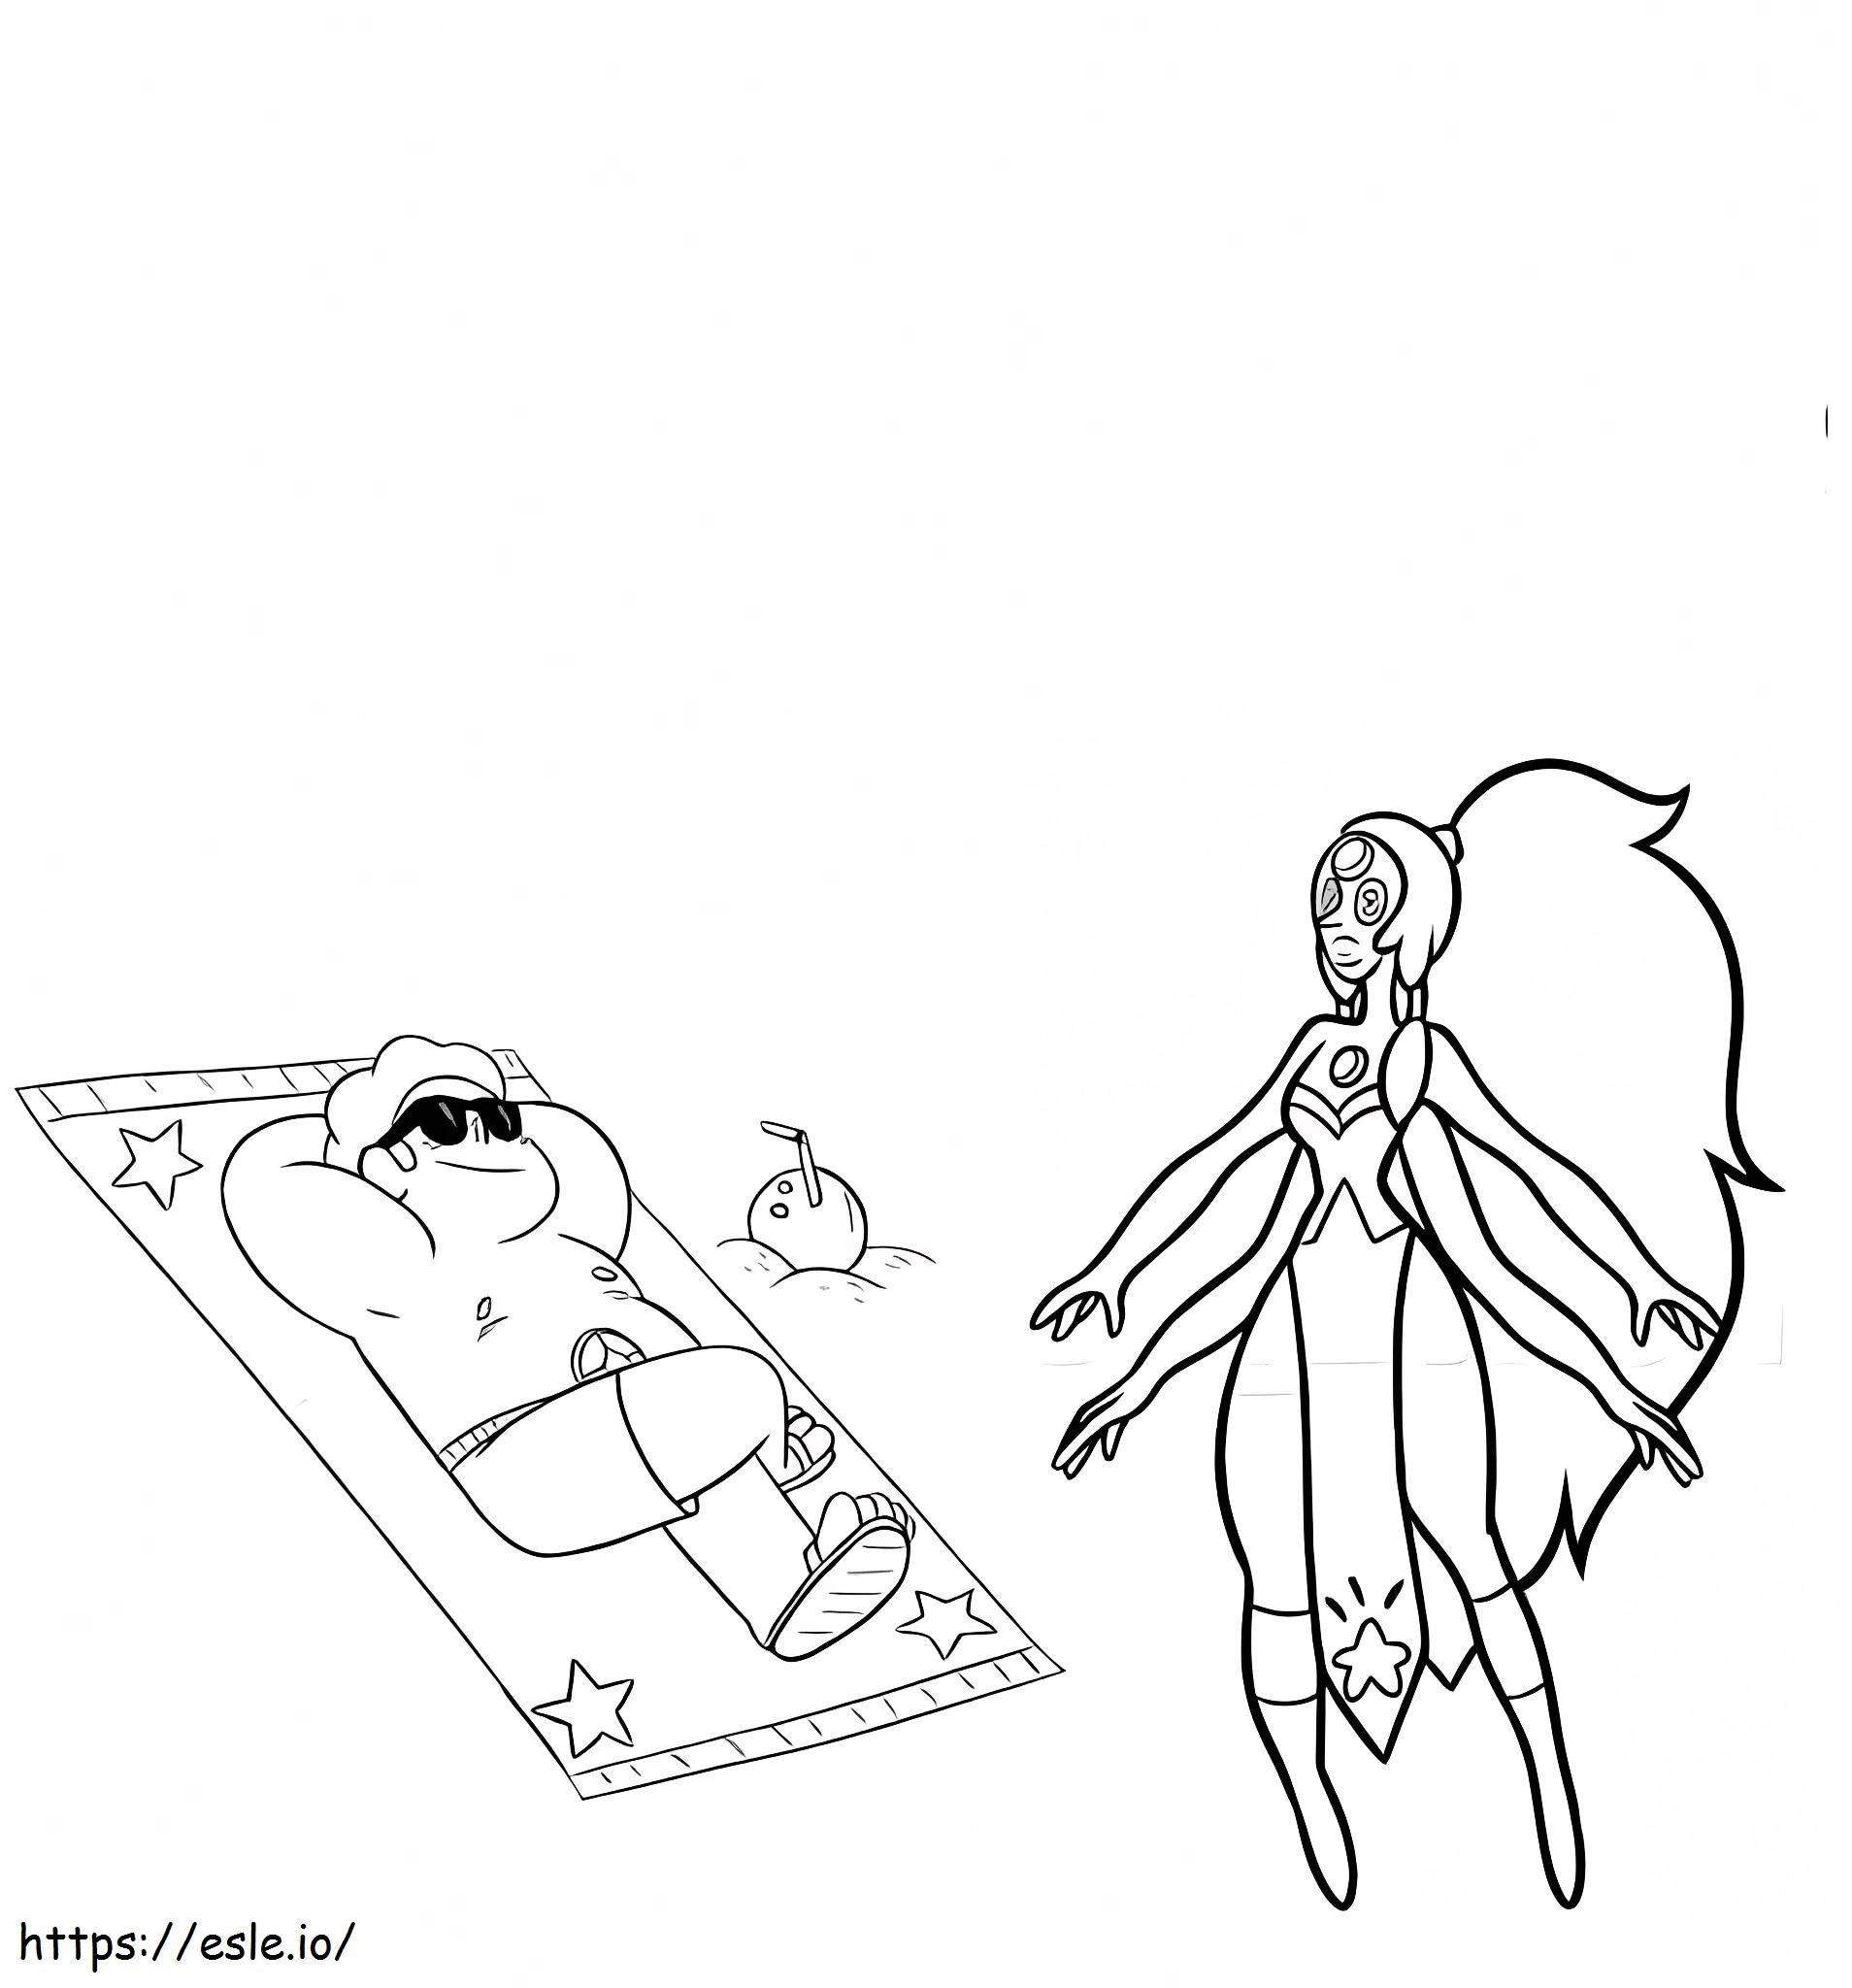 Steven And Opal On The Beach coloring page